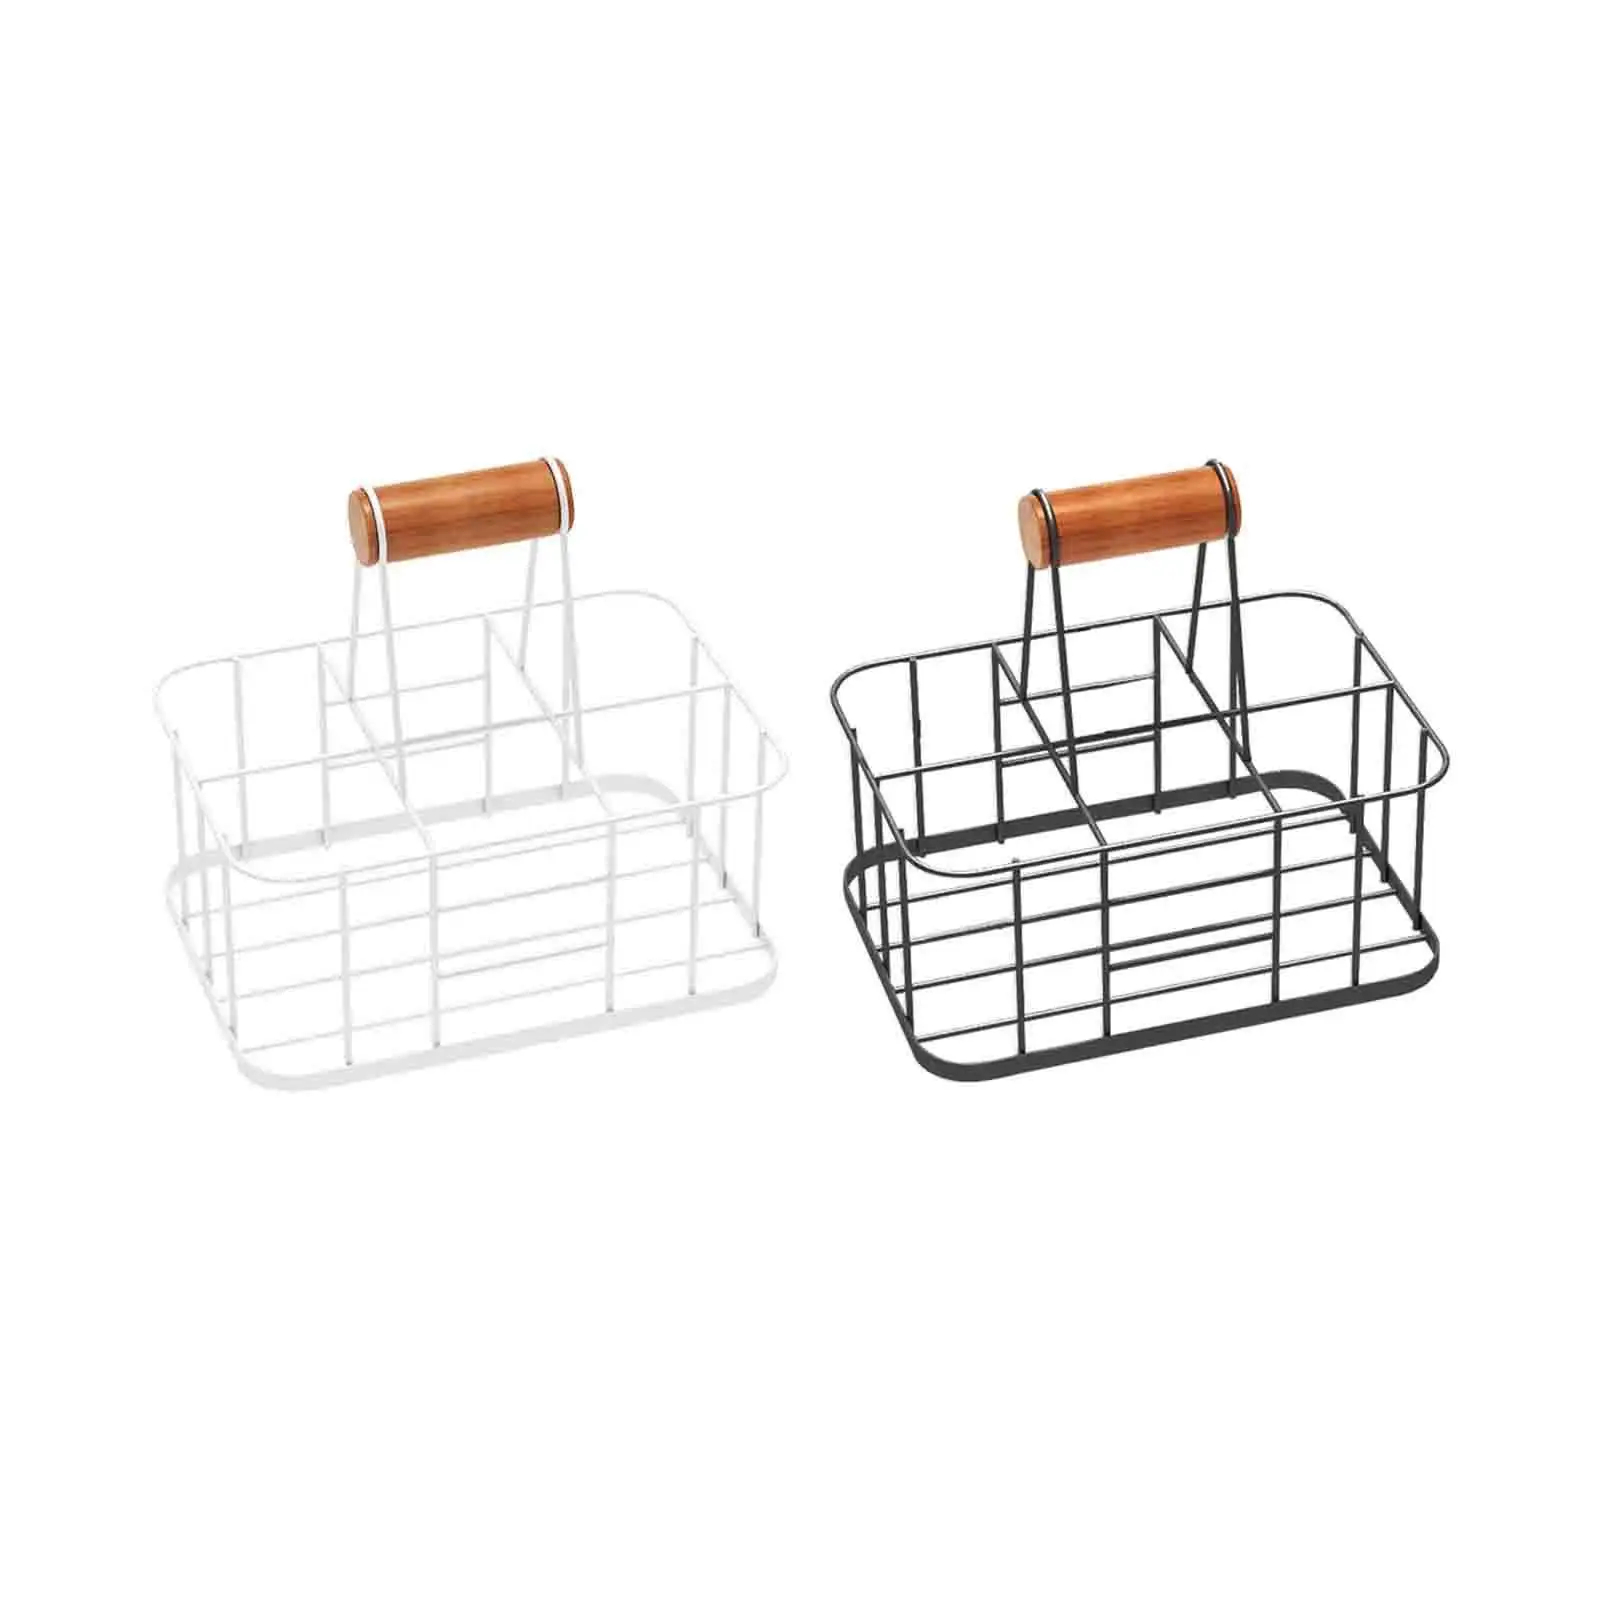 Drink Delivery Carrier Accs Multifunction with Handle Beer Rack Basket Drink